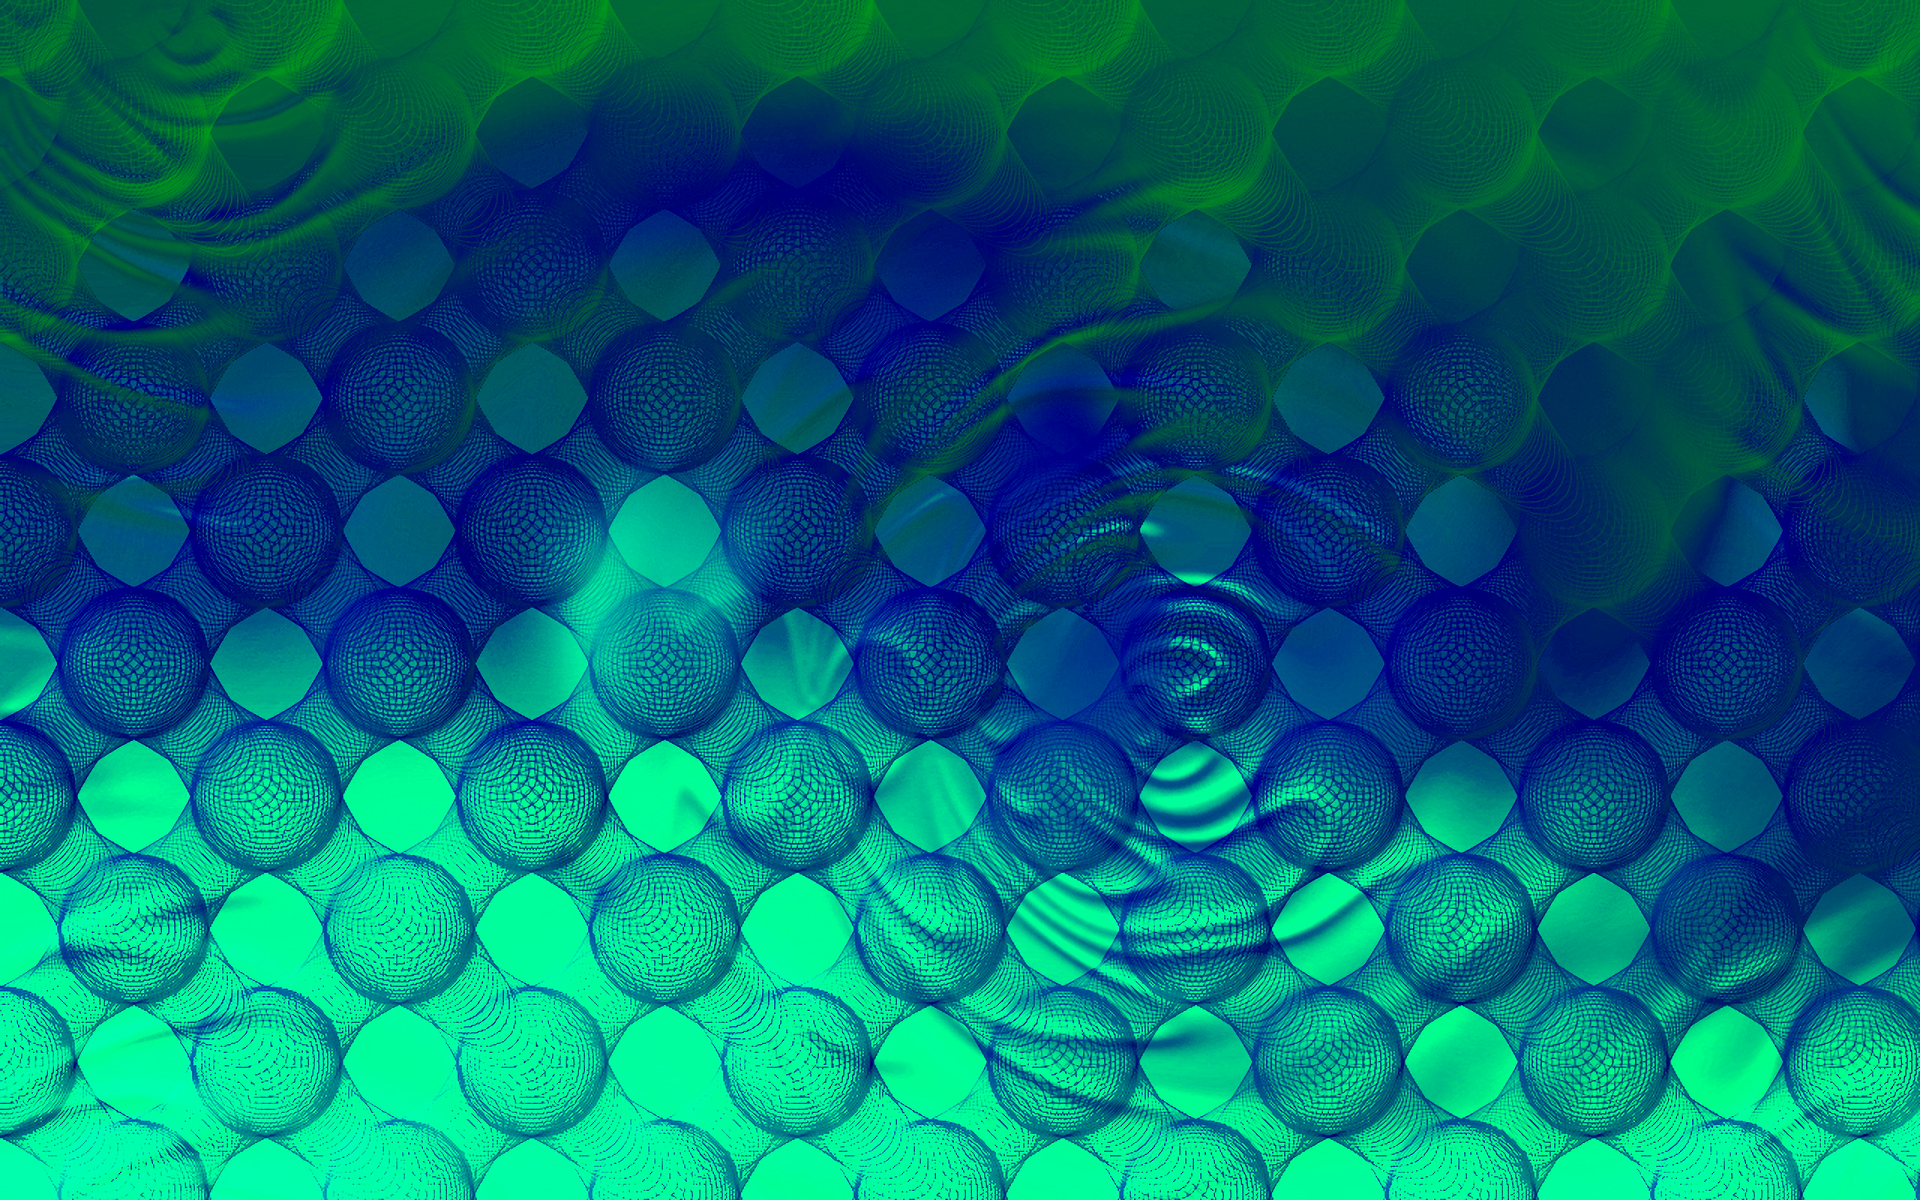 Rippling water in shades of blue and green forming a circle with octagonal patterns.